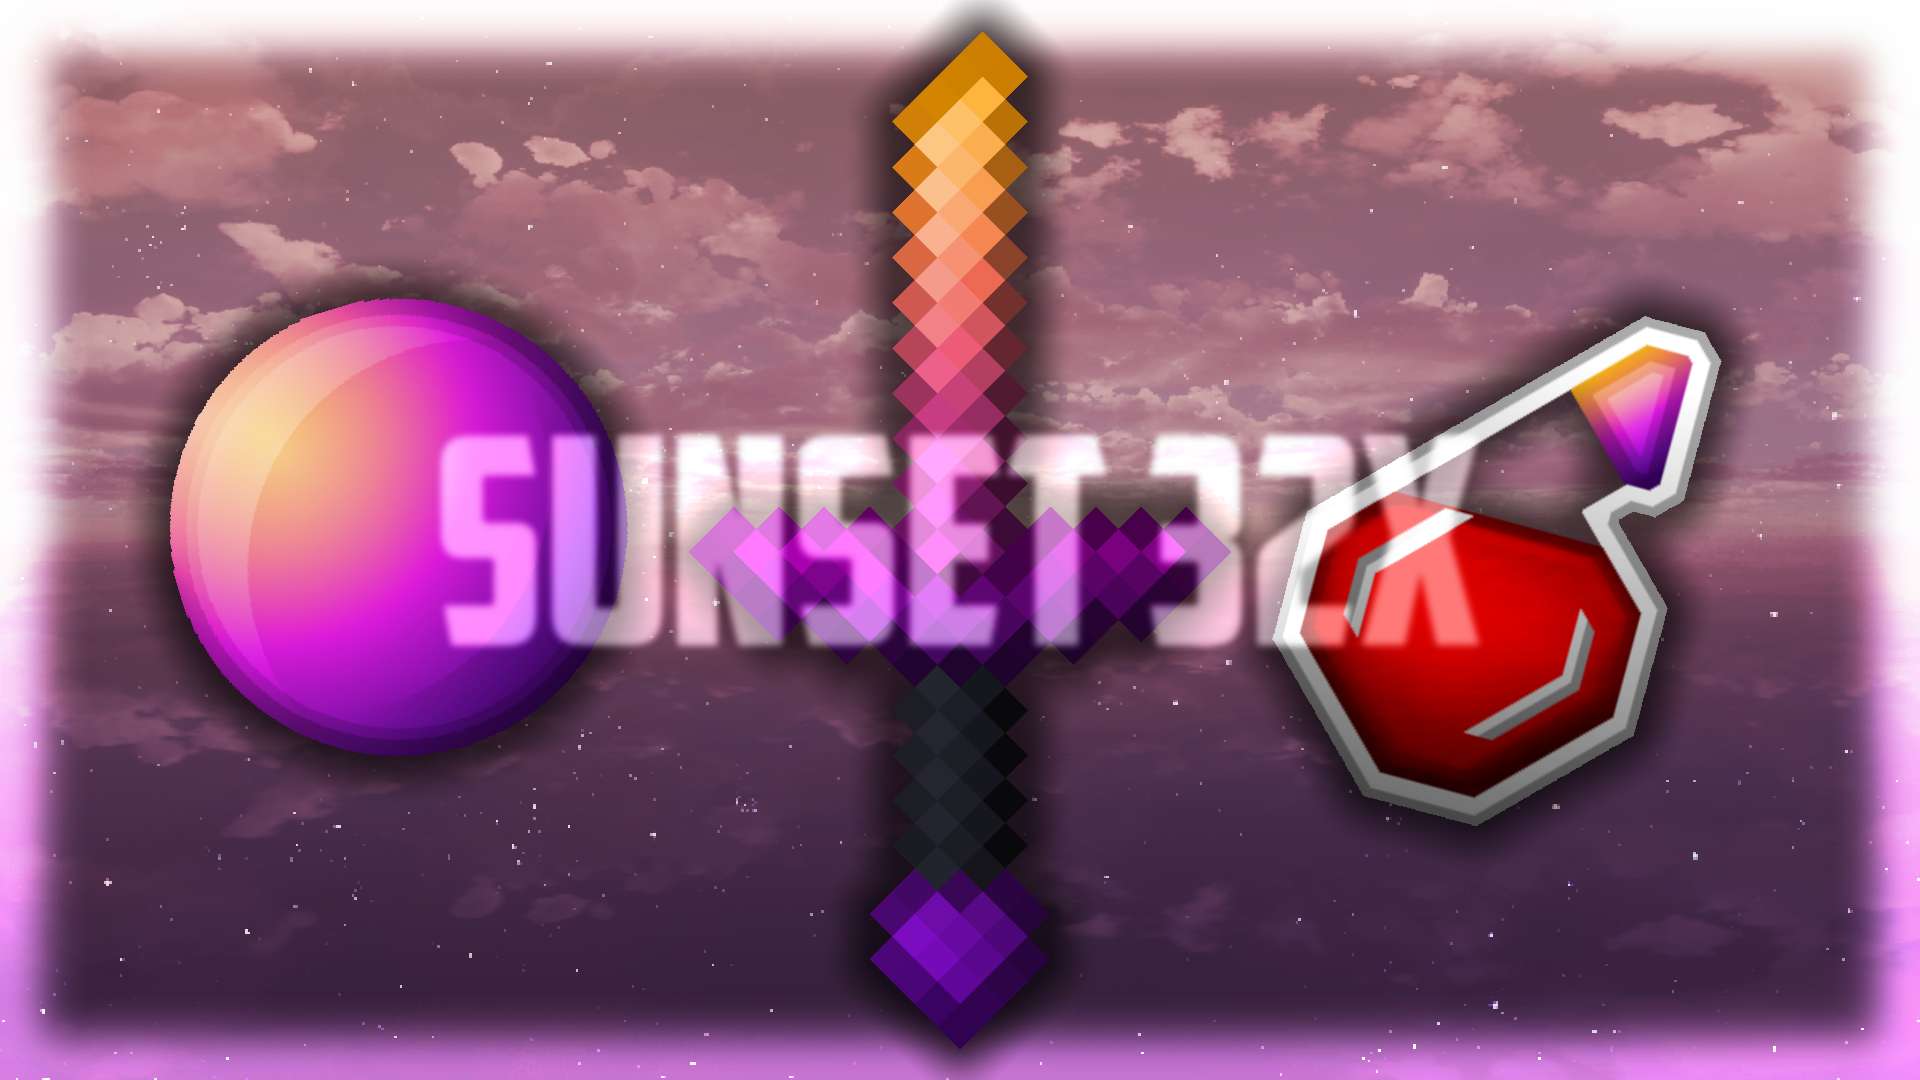 Sunset 32 by Zlax on PvPRP